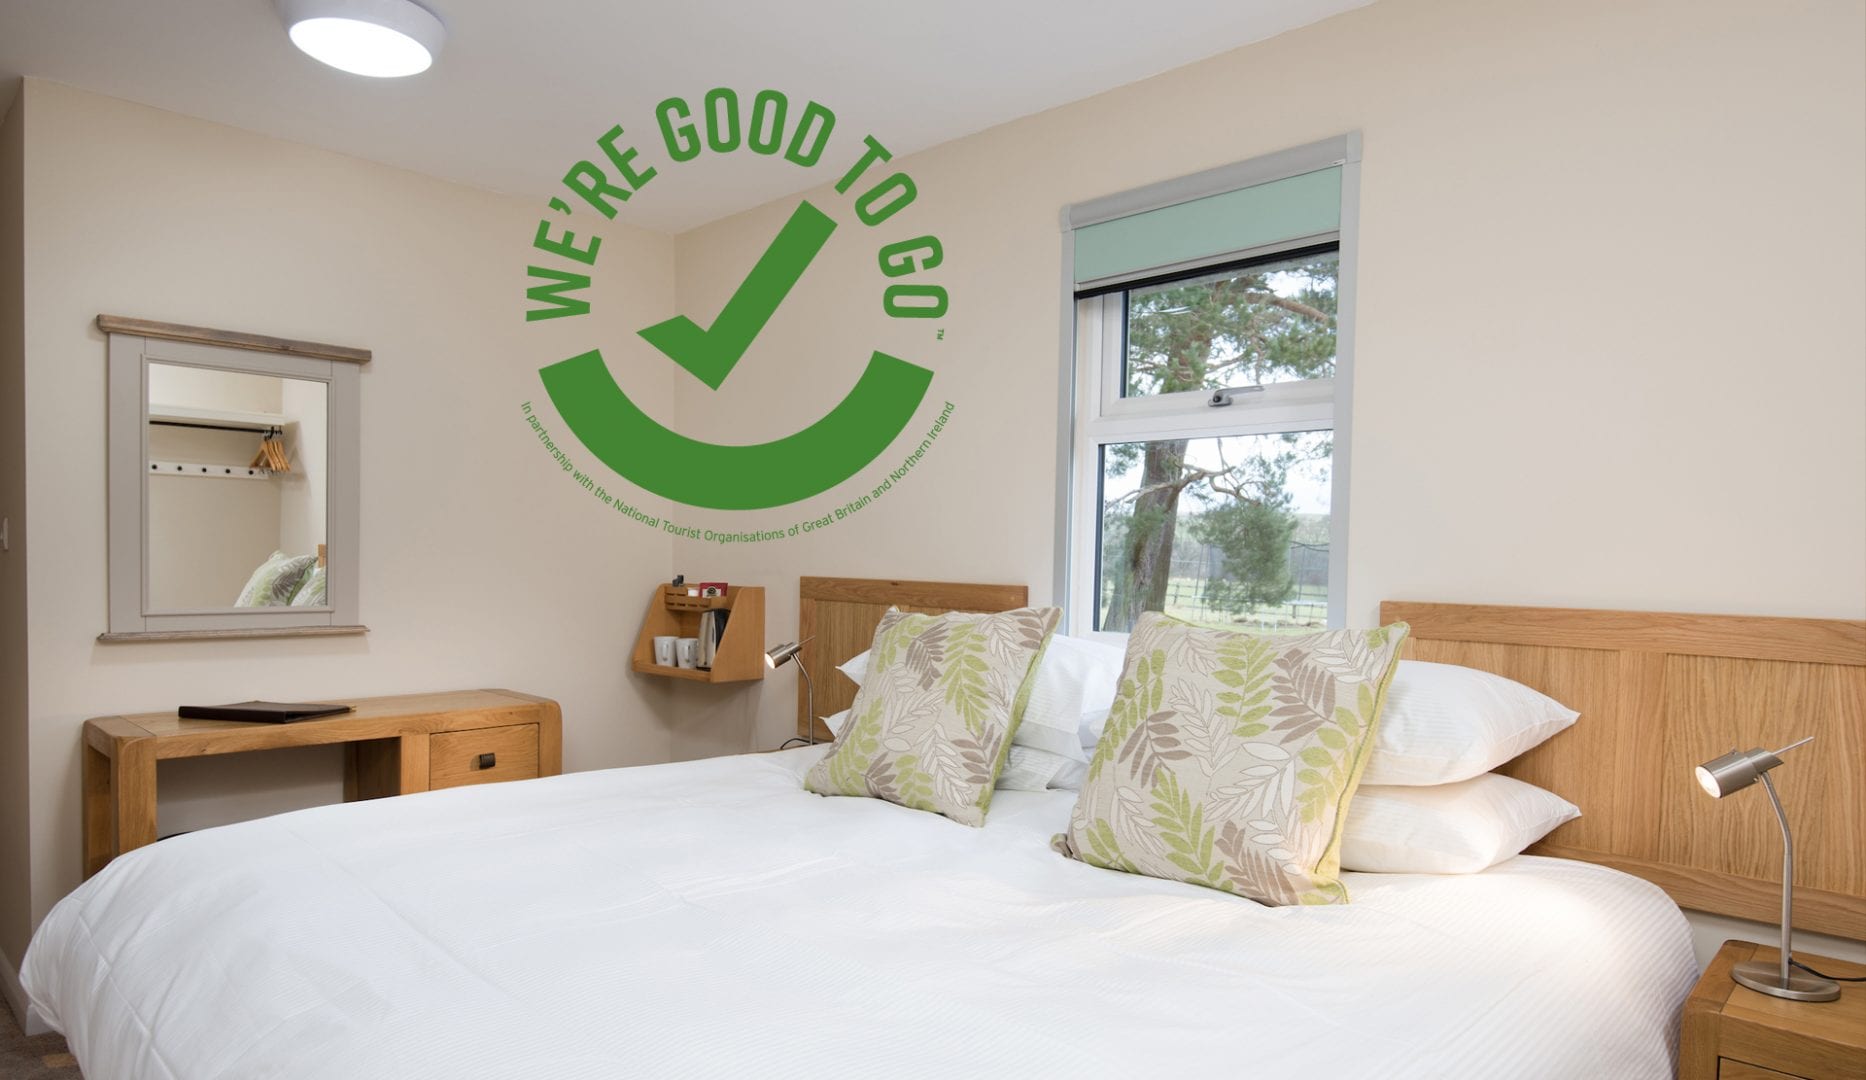 Brown Rigg Guest Rooms are Good to Go